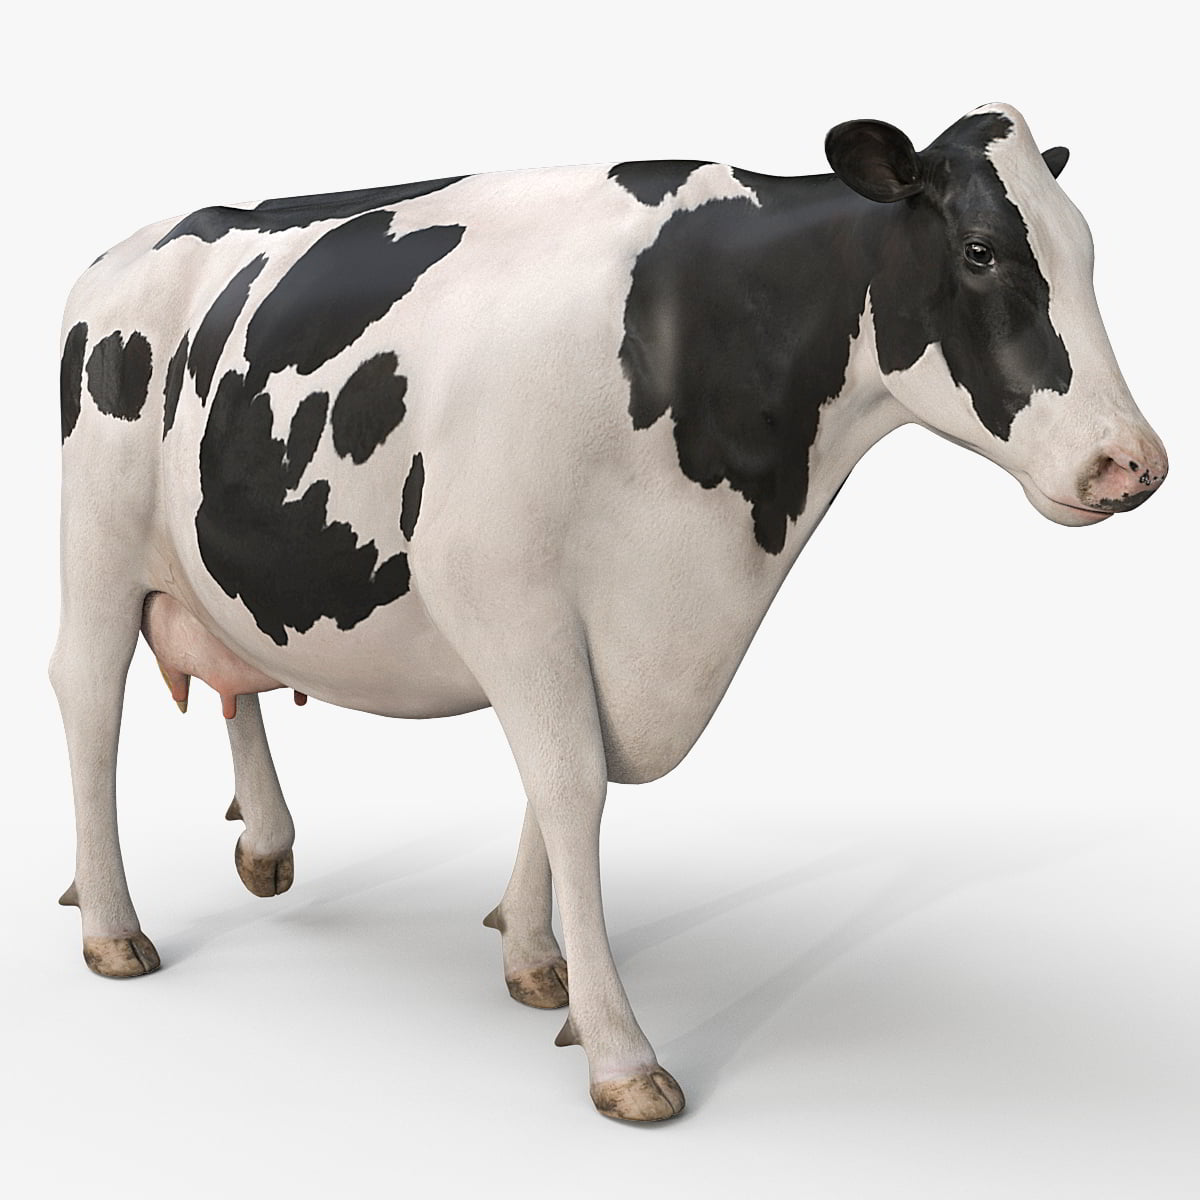 TURBOSQUID – Cow PRO ( Holstein ) 3D model by MotionCow